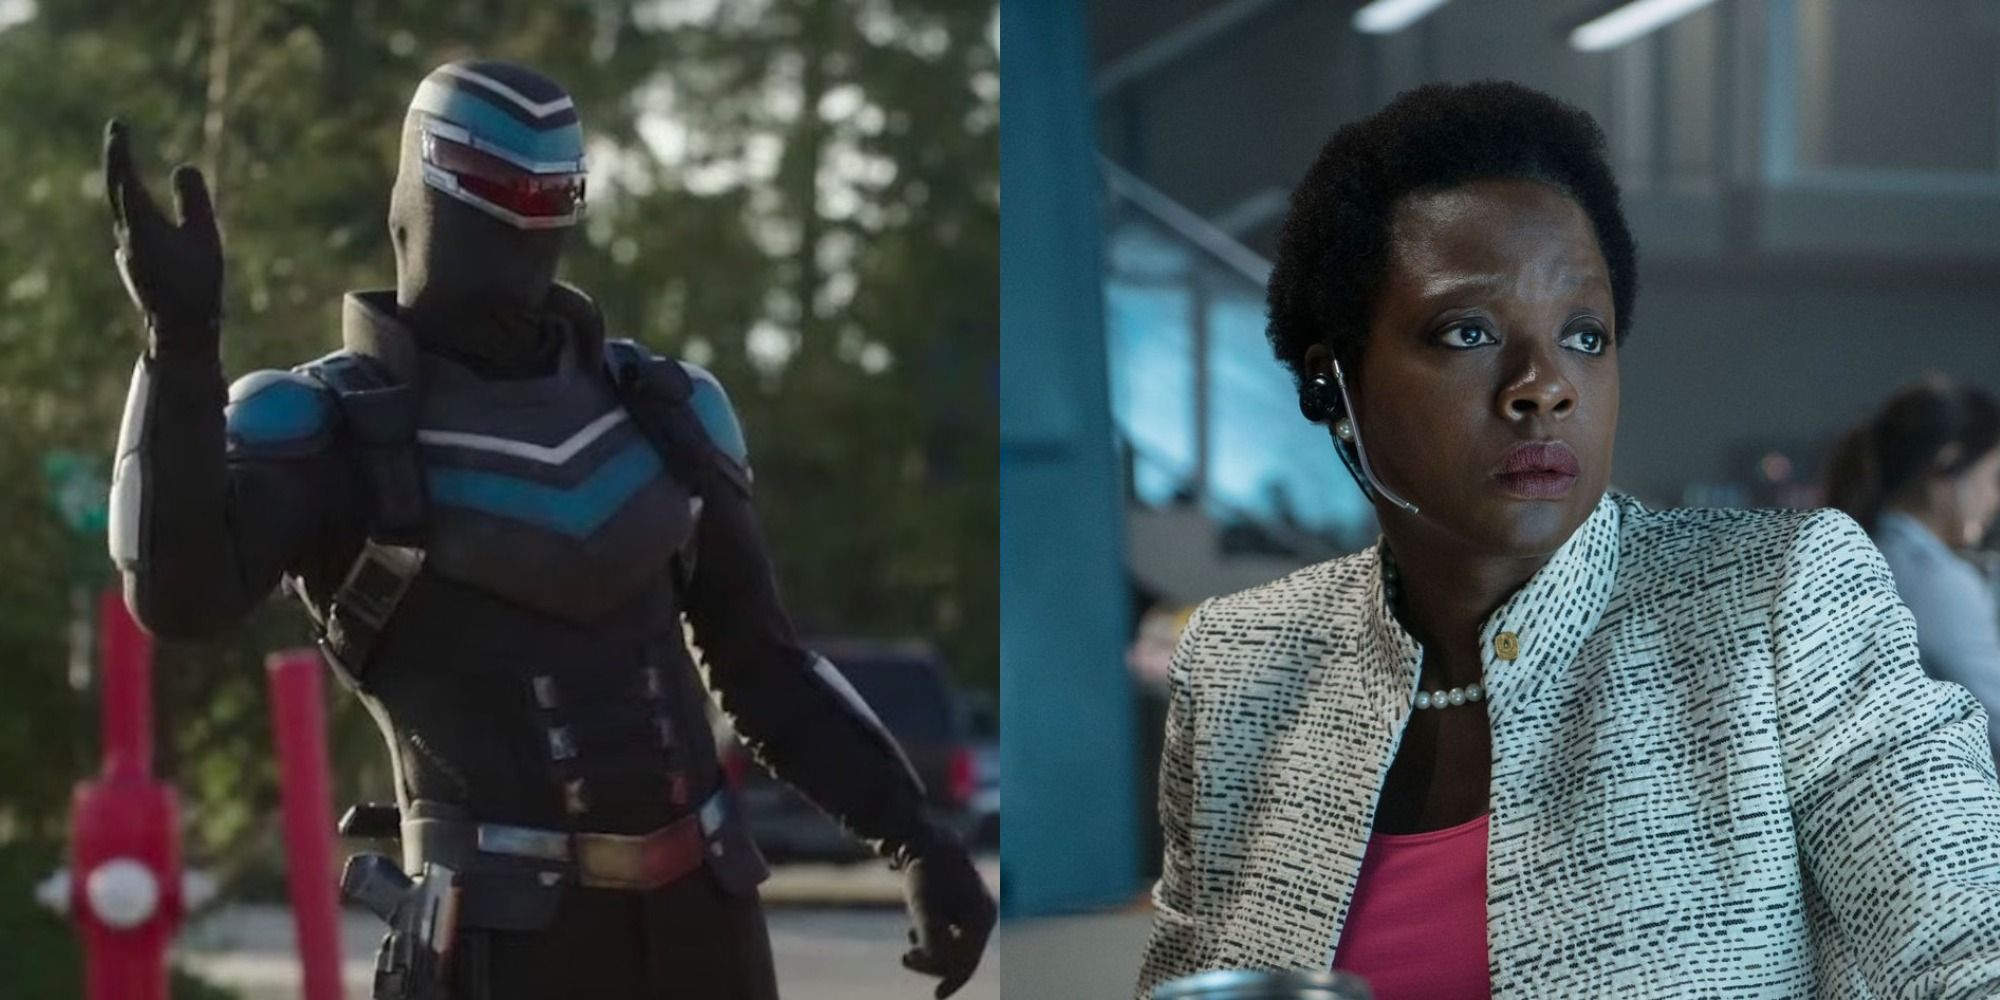 Split image showing Vigilante in Peacemaker and Amanda Waller in The Suicide Squad